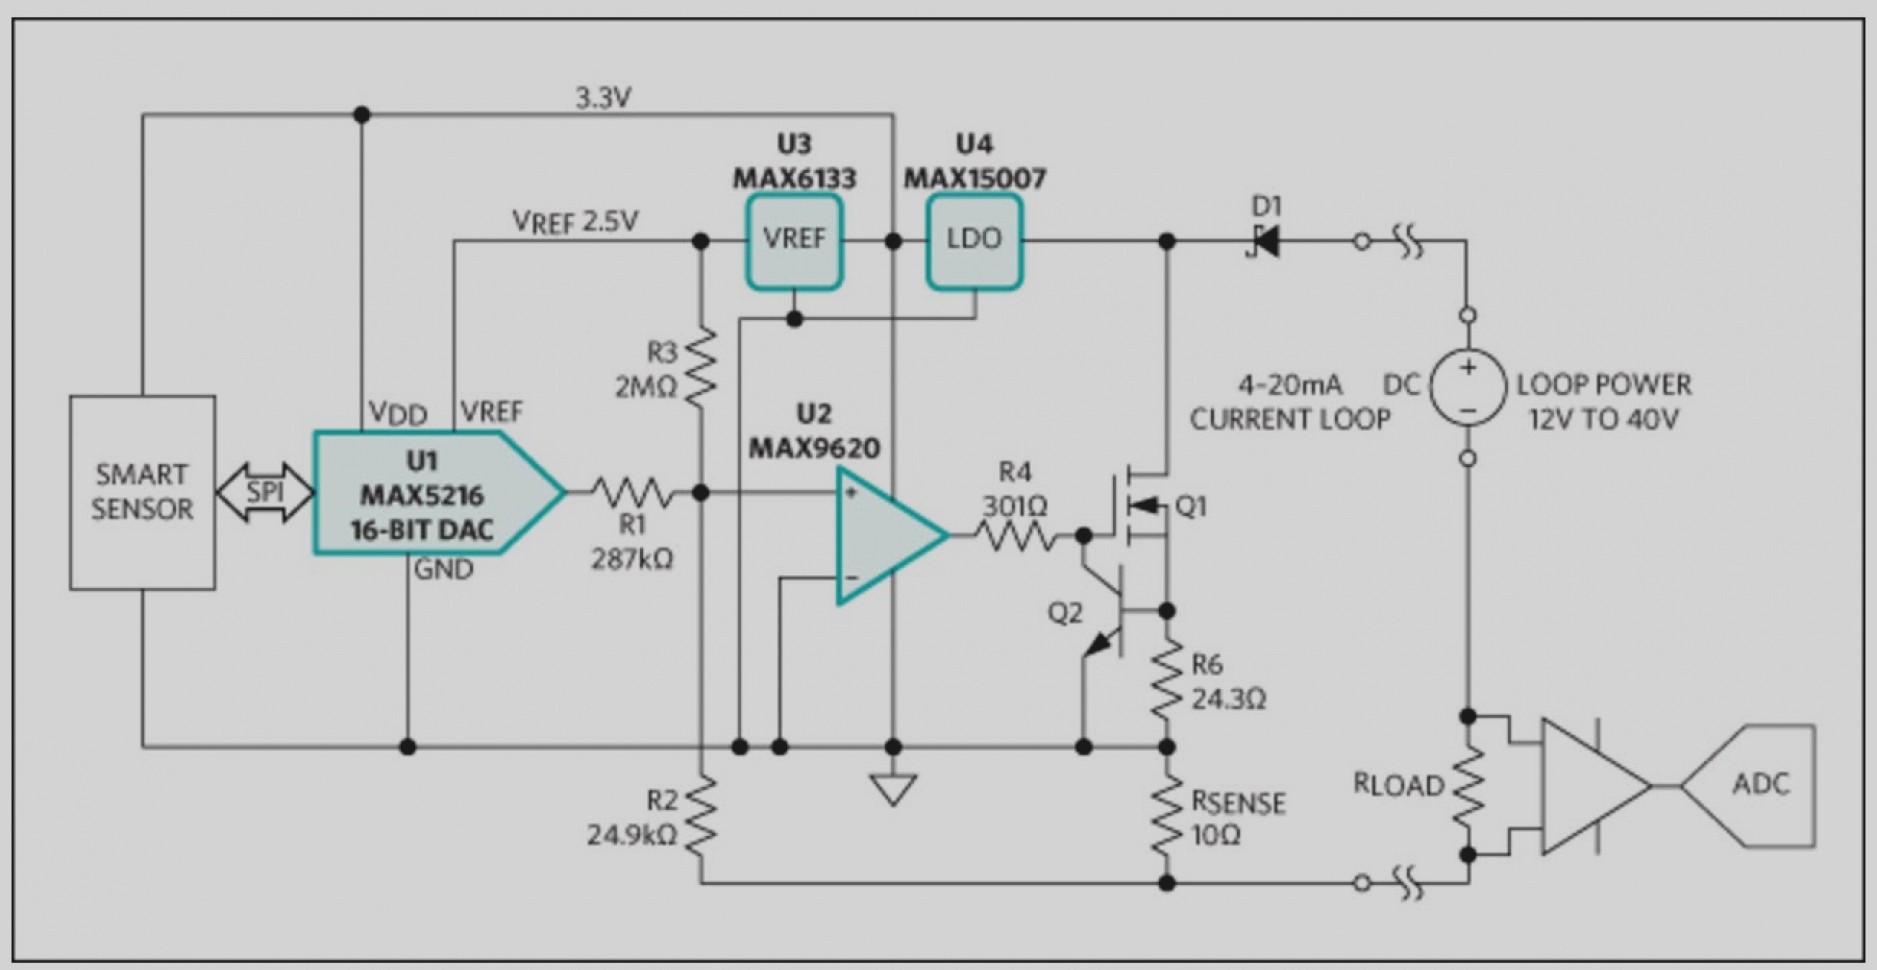 Loop Power Wiring Diagram Why Do Industrial Sensors Measure In 4 20mA To Programmable Logic